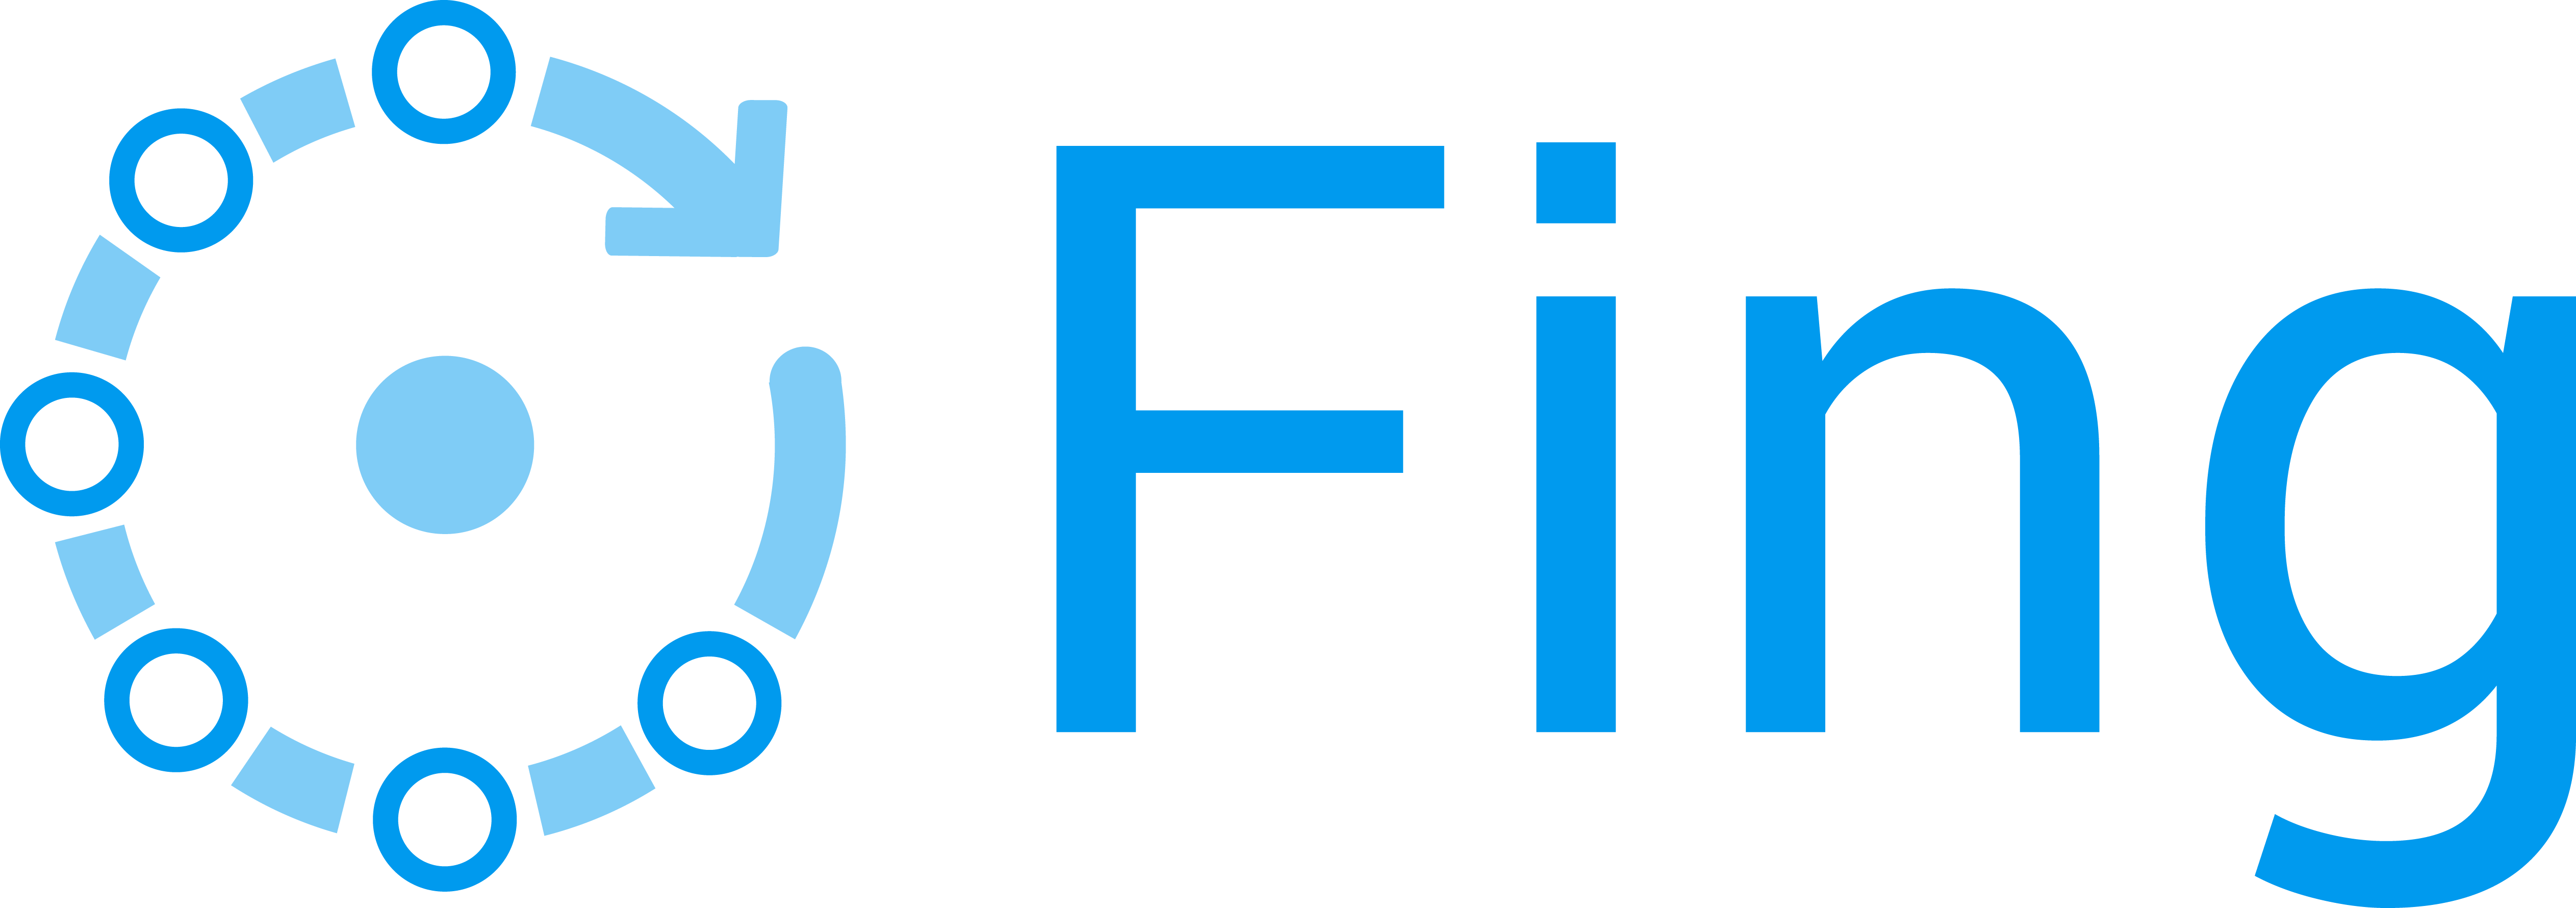  The Fing logo in blue against a dark green background.